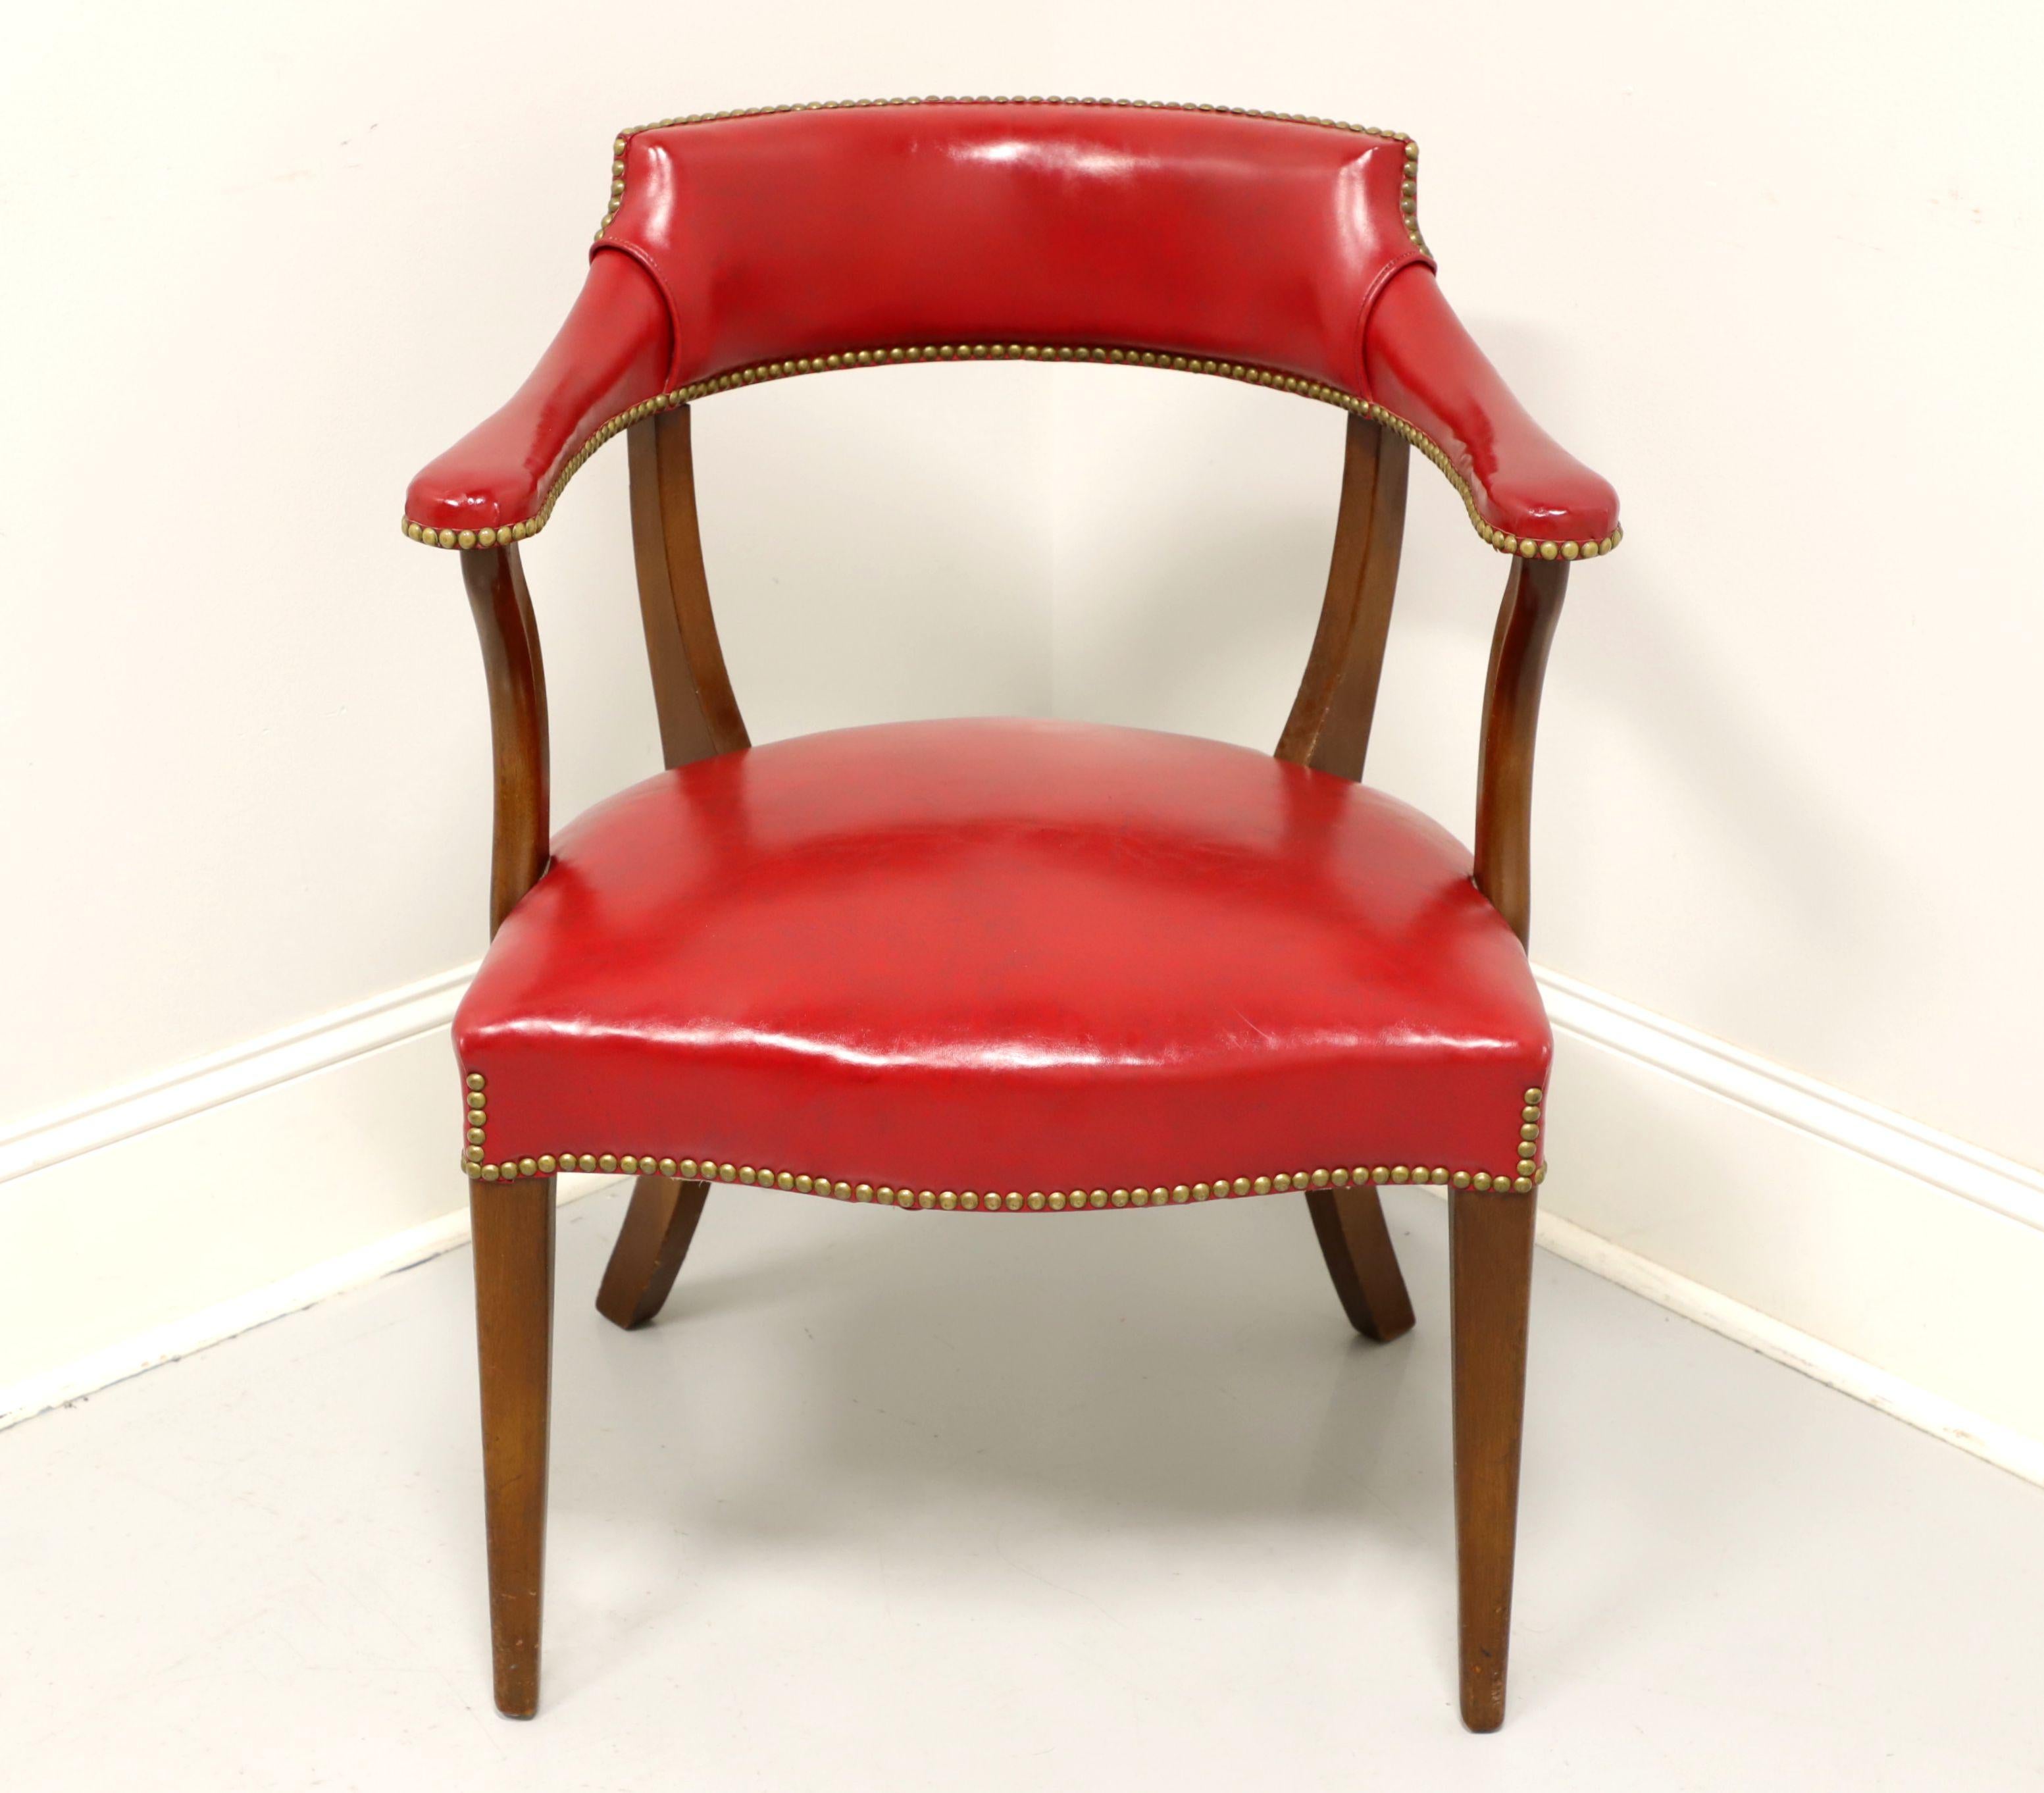 A vintage Traditional style library / office chair by Hickory Chair Company, of Hickory, North Carolina, USA. Solid mahogany frame with red faux leather (vinyl) upholstery, brass nailhead trim, saber rear legs and tapered straight front legs. Made